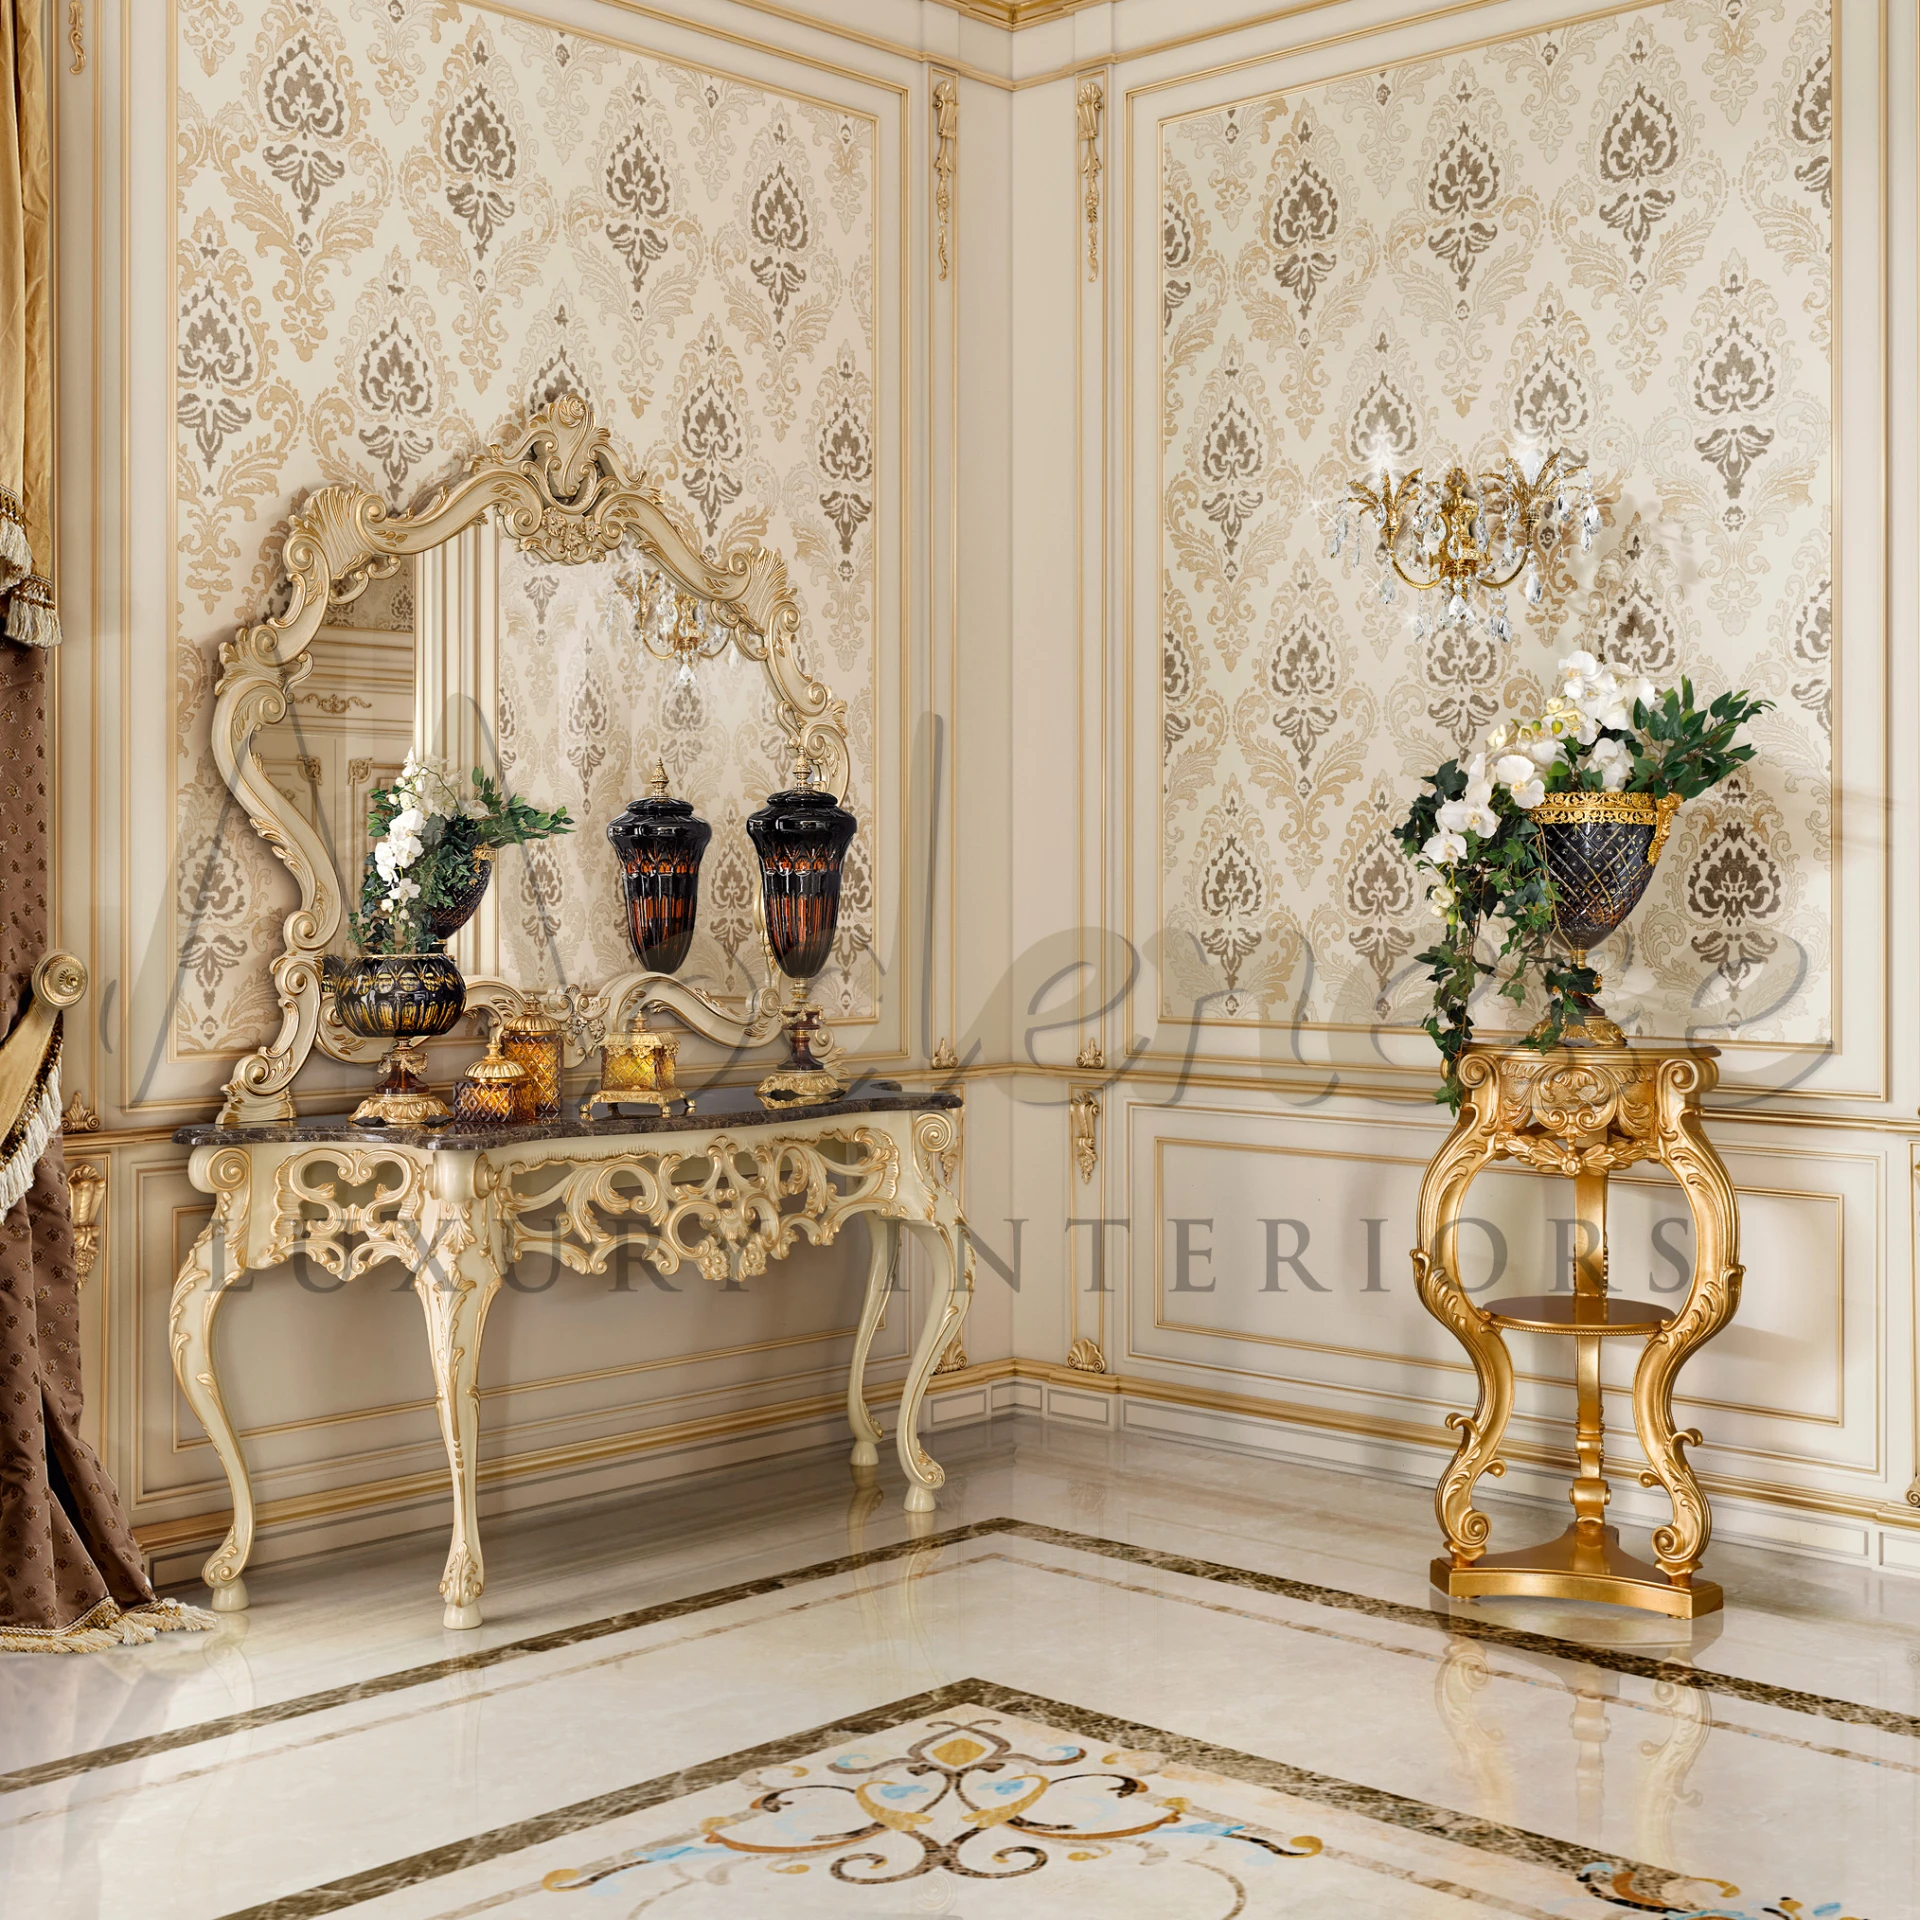 The essence of Italian design in the Florentine Figured Mirror, showcasing the artistry and unique materials of Florentine craftsmanship.